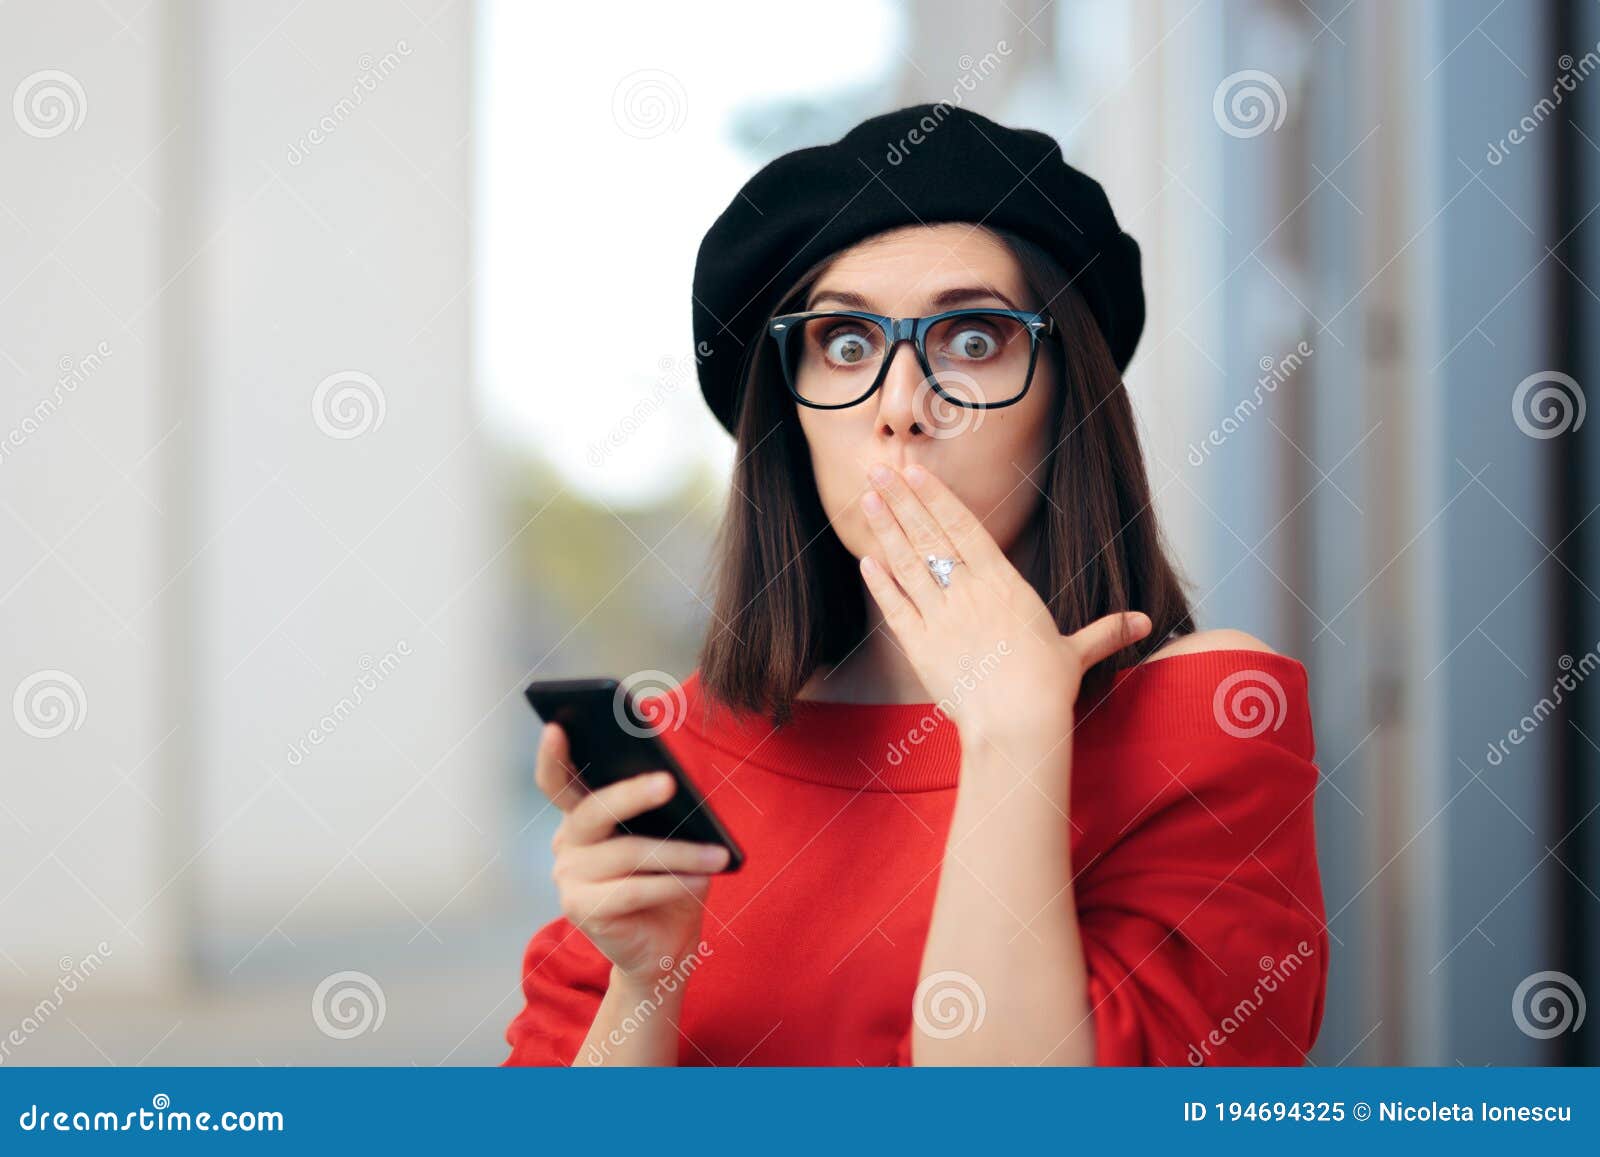 surprised fashion woman reading a text message